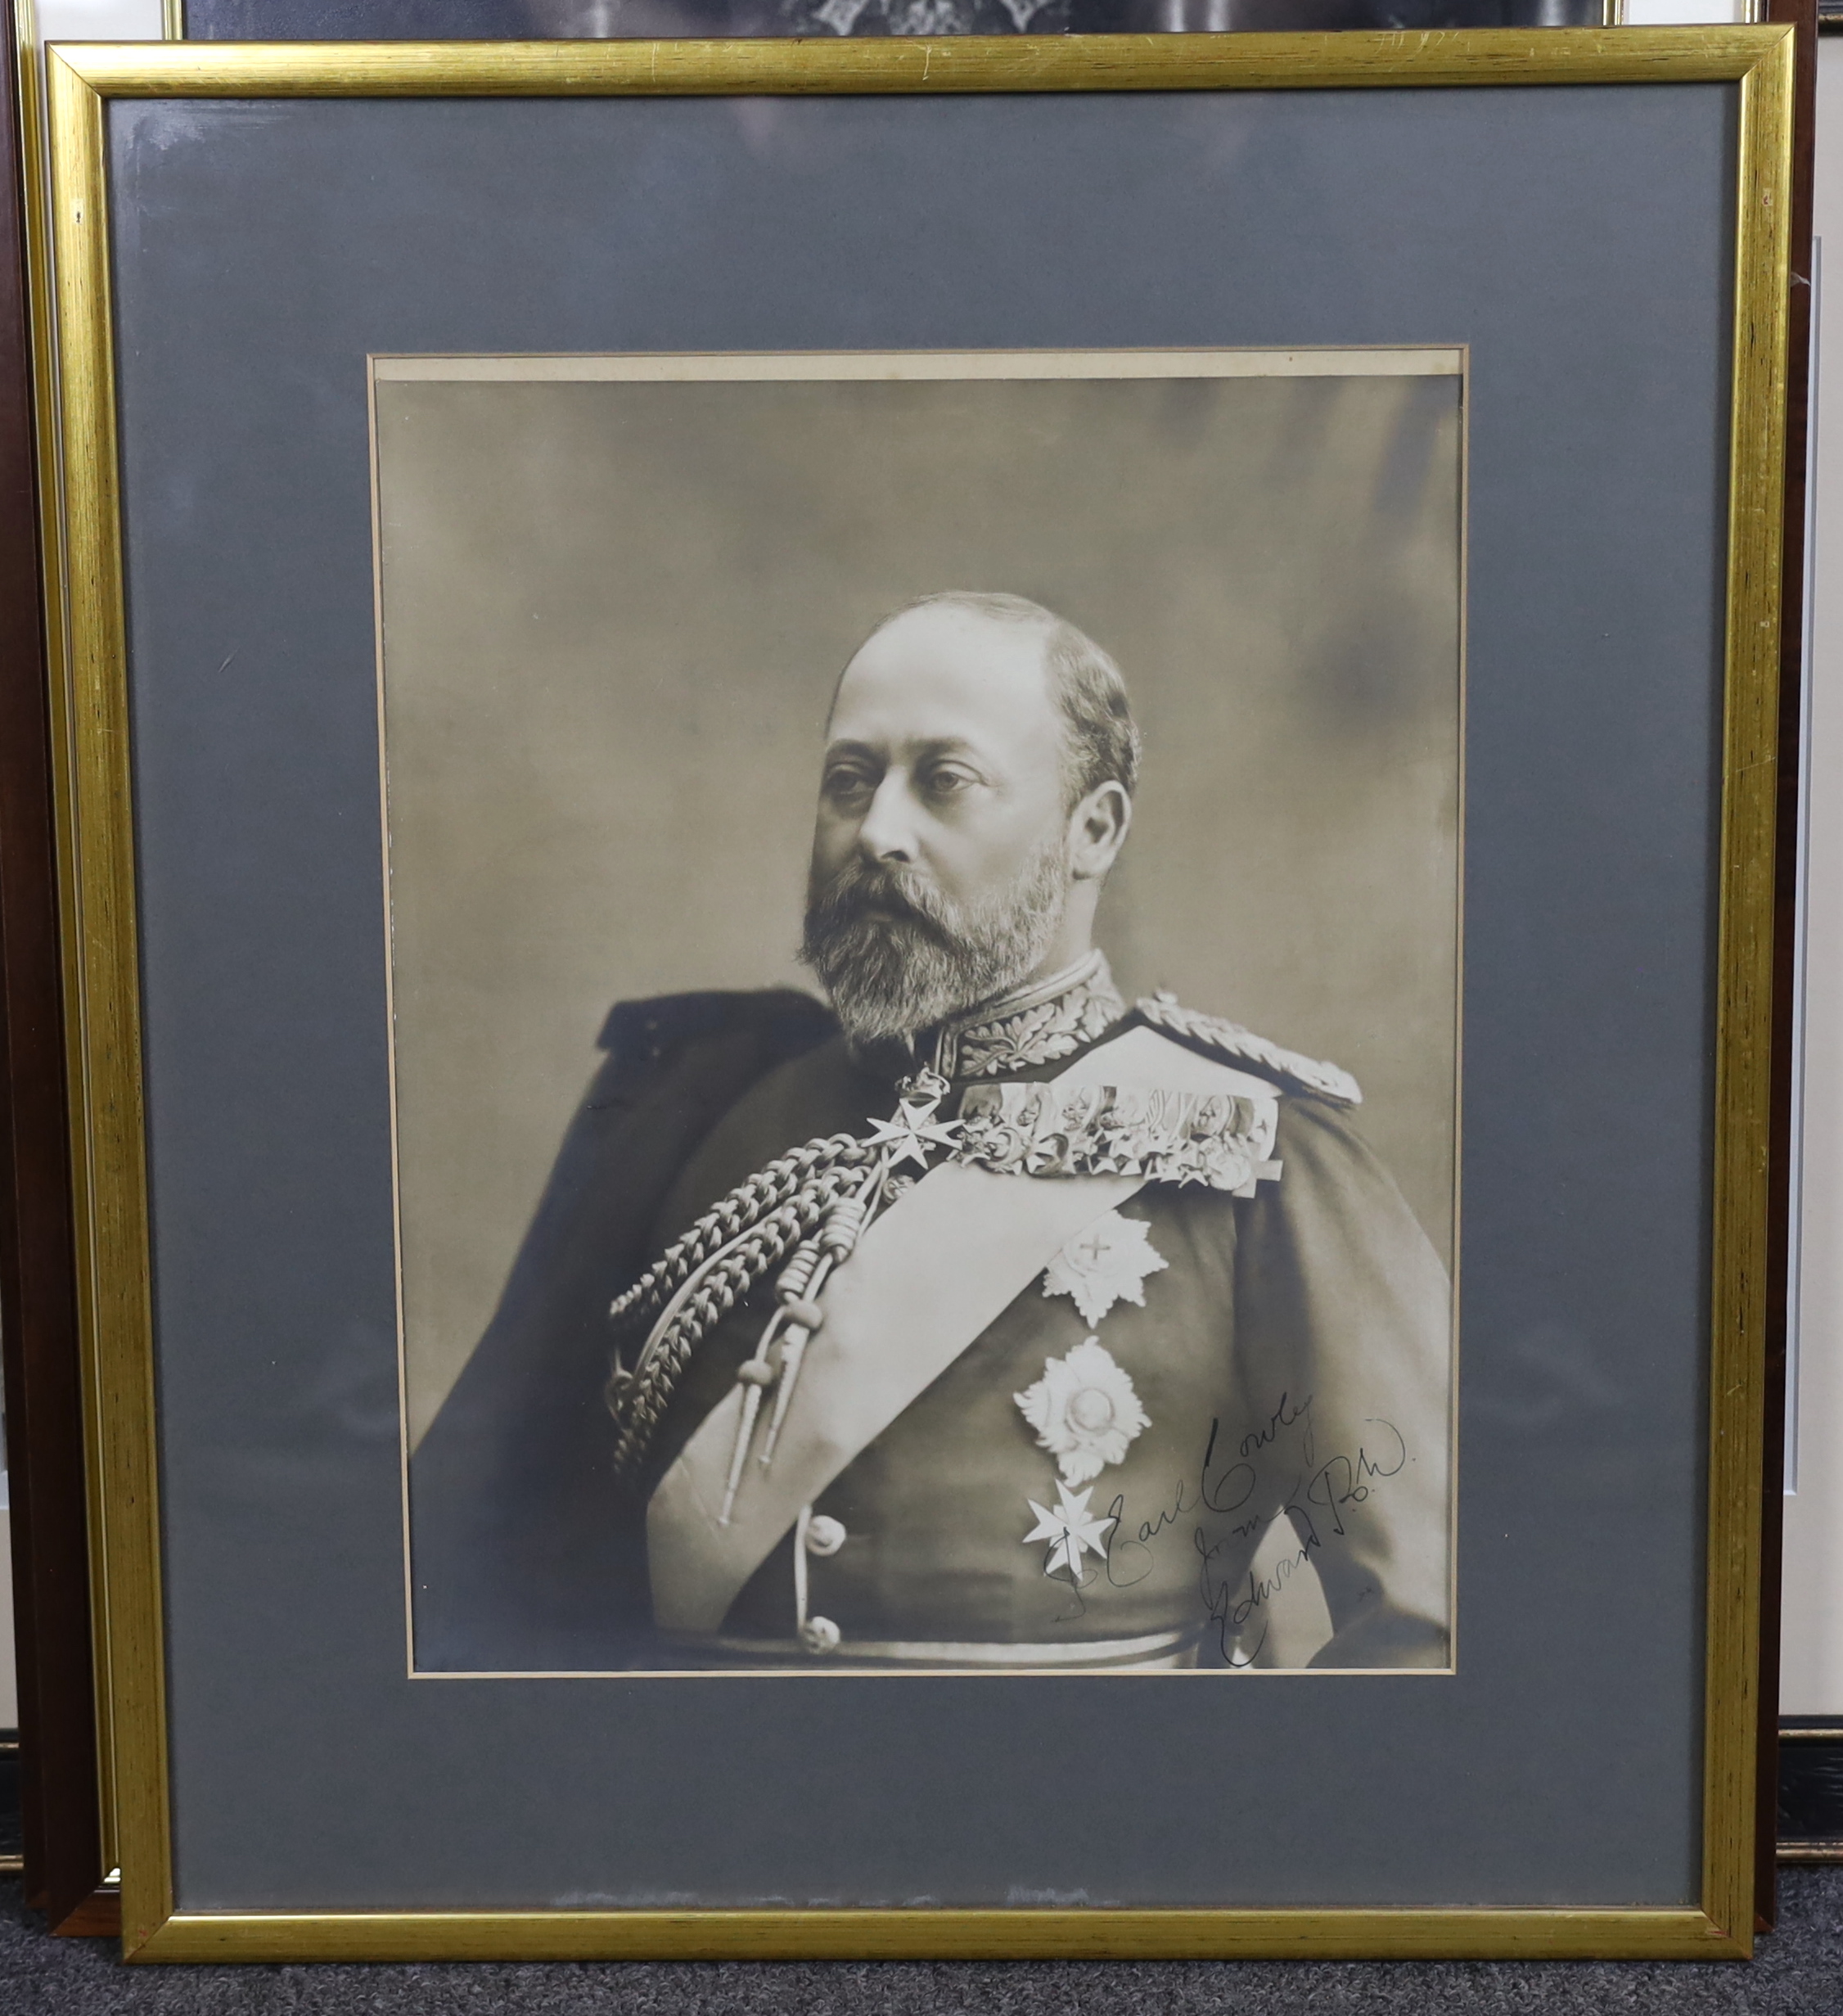 A presentation photograph of King Edward VII when Prince of Wales 38 x 30cm